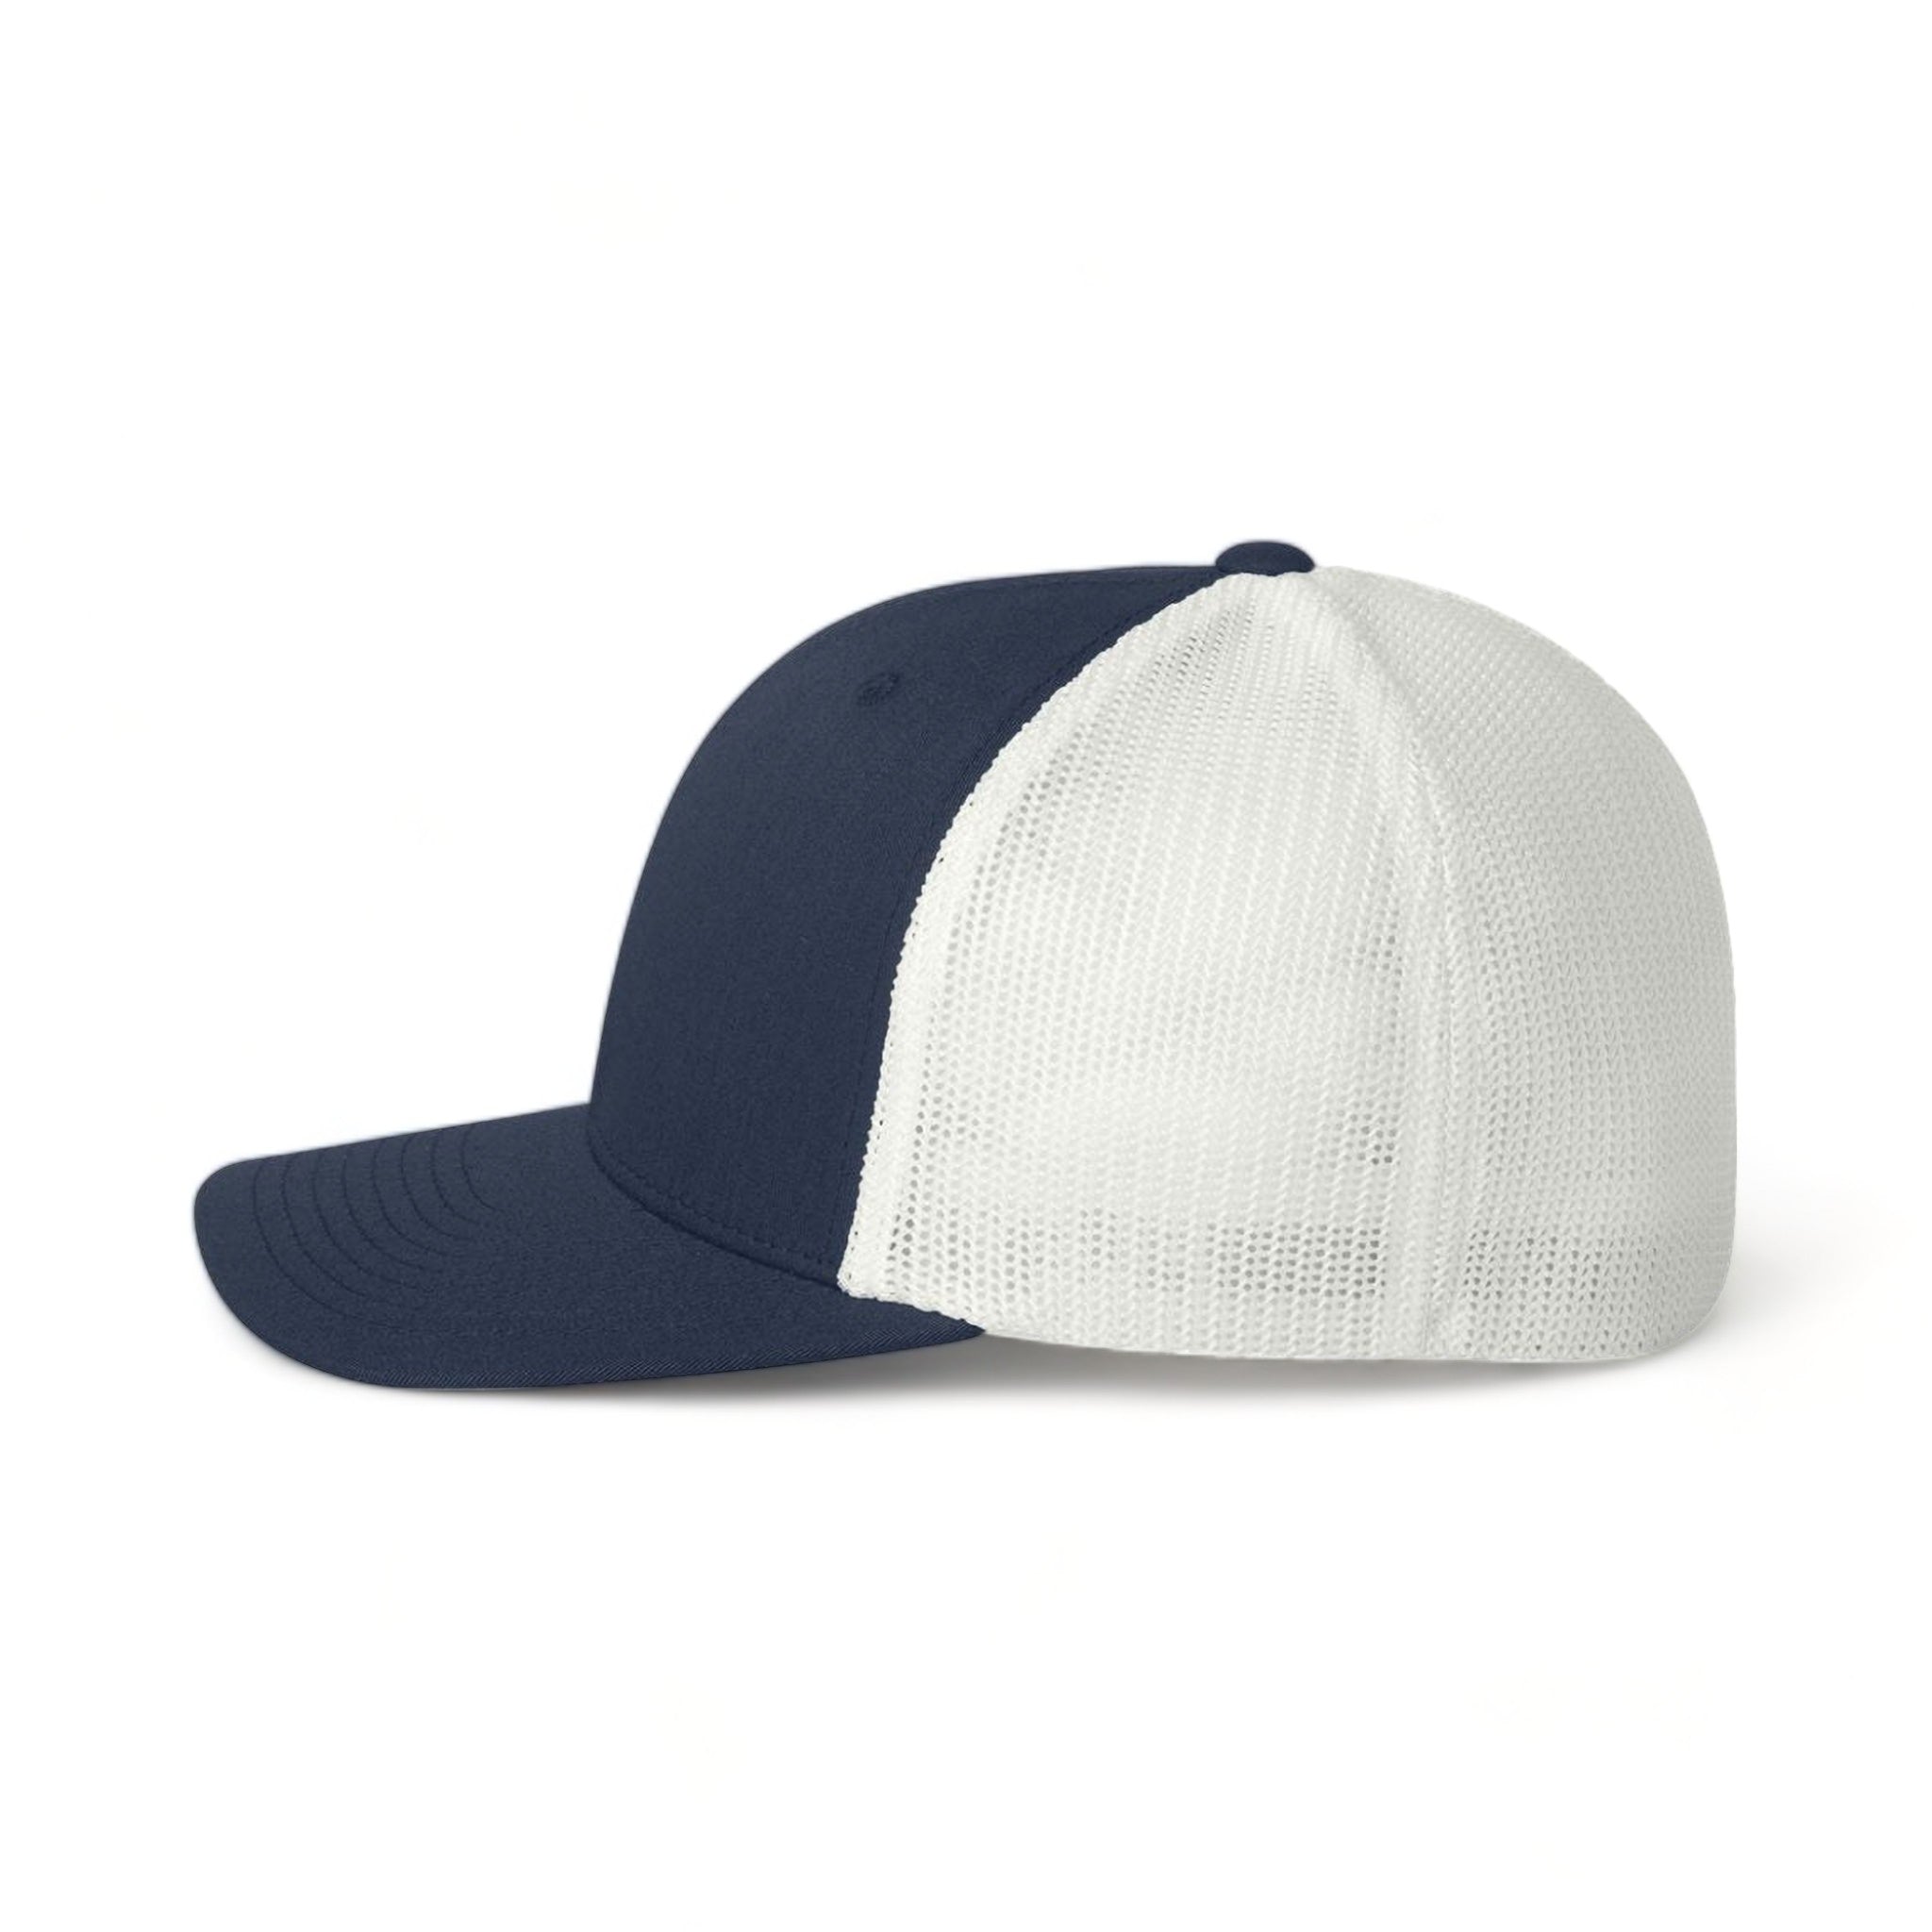 Side view of Flexfit 6511 custom hat in navy and white